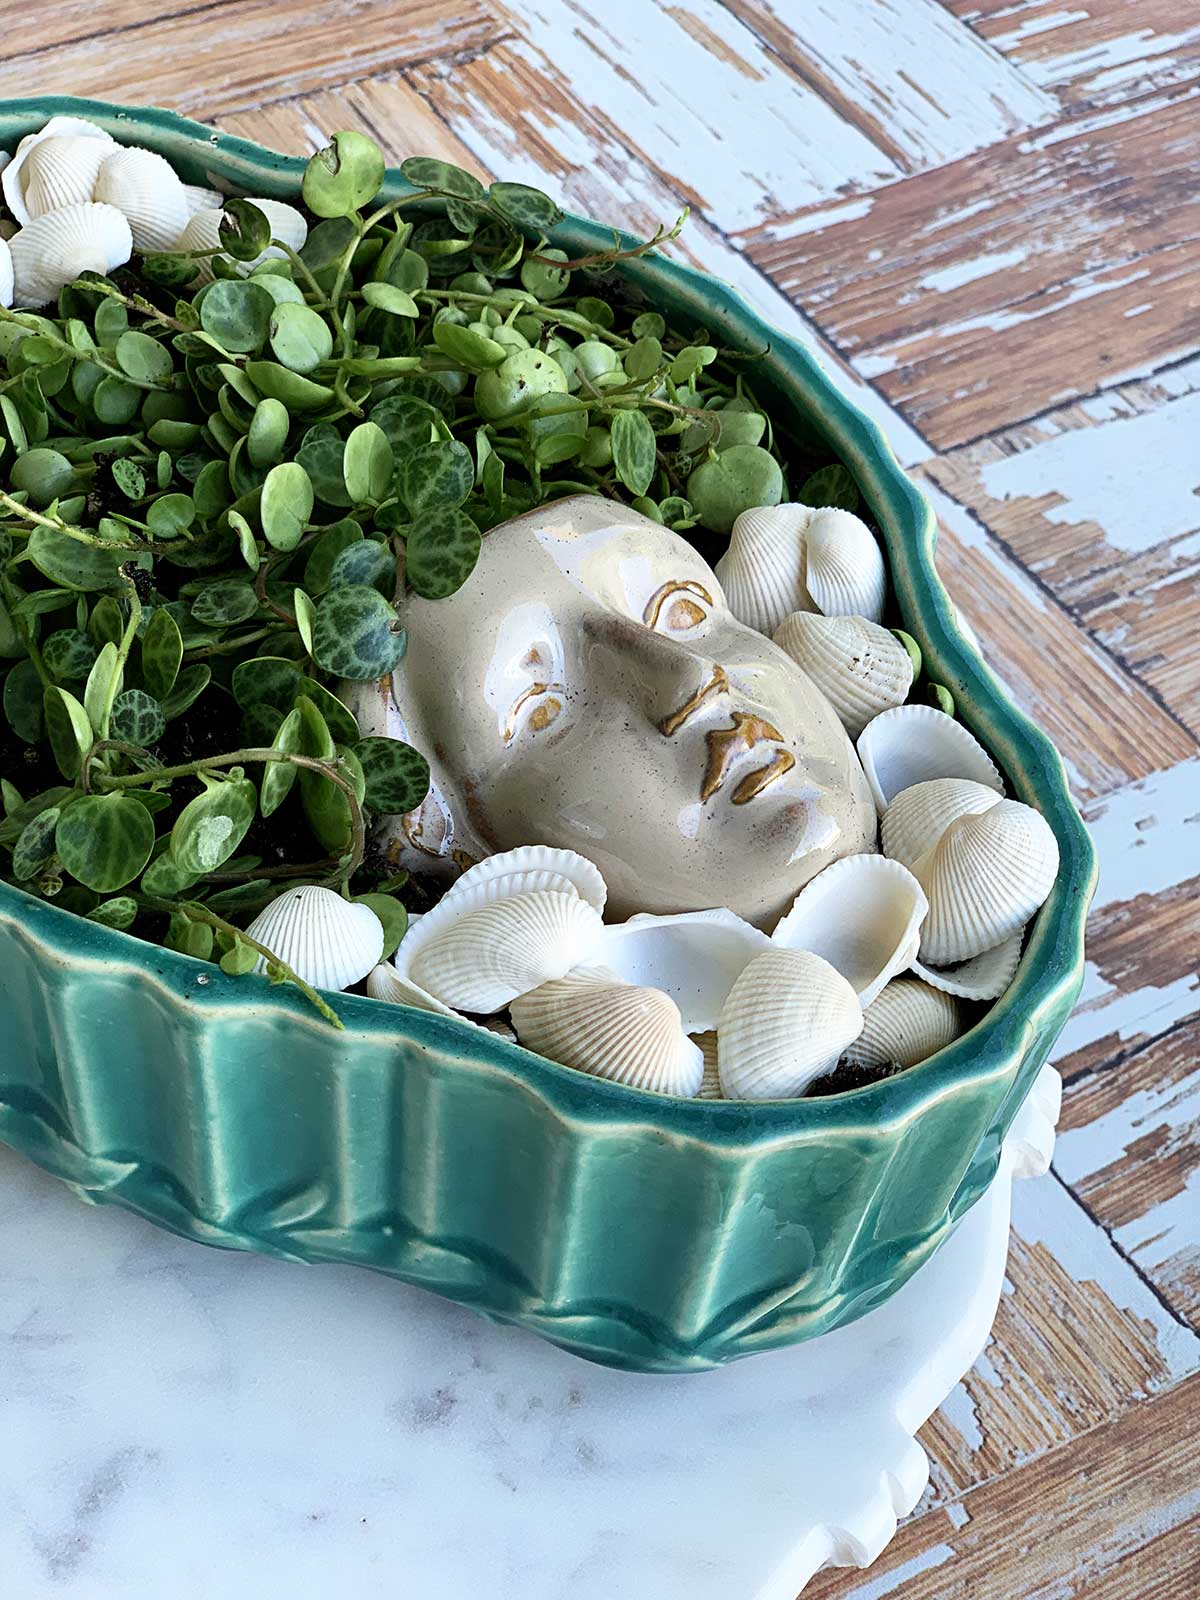 Planter shaped like a head setting in a shallow succulent bowl.